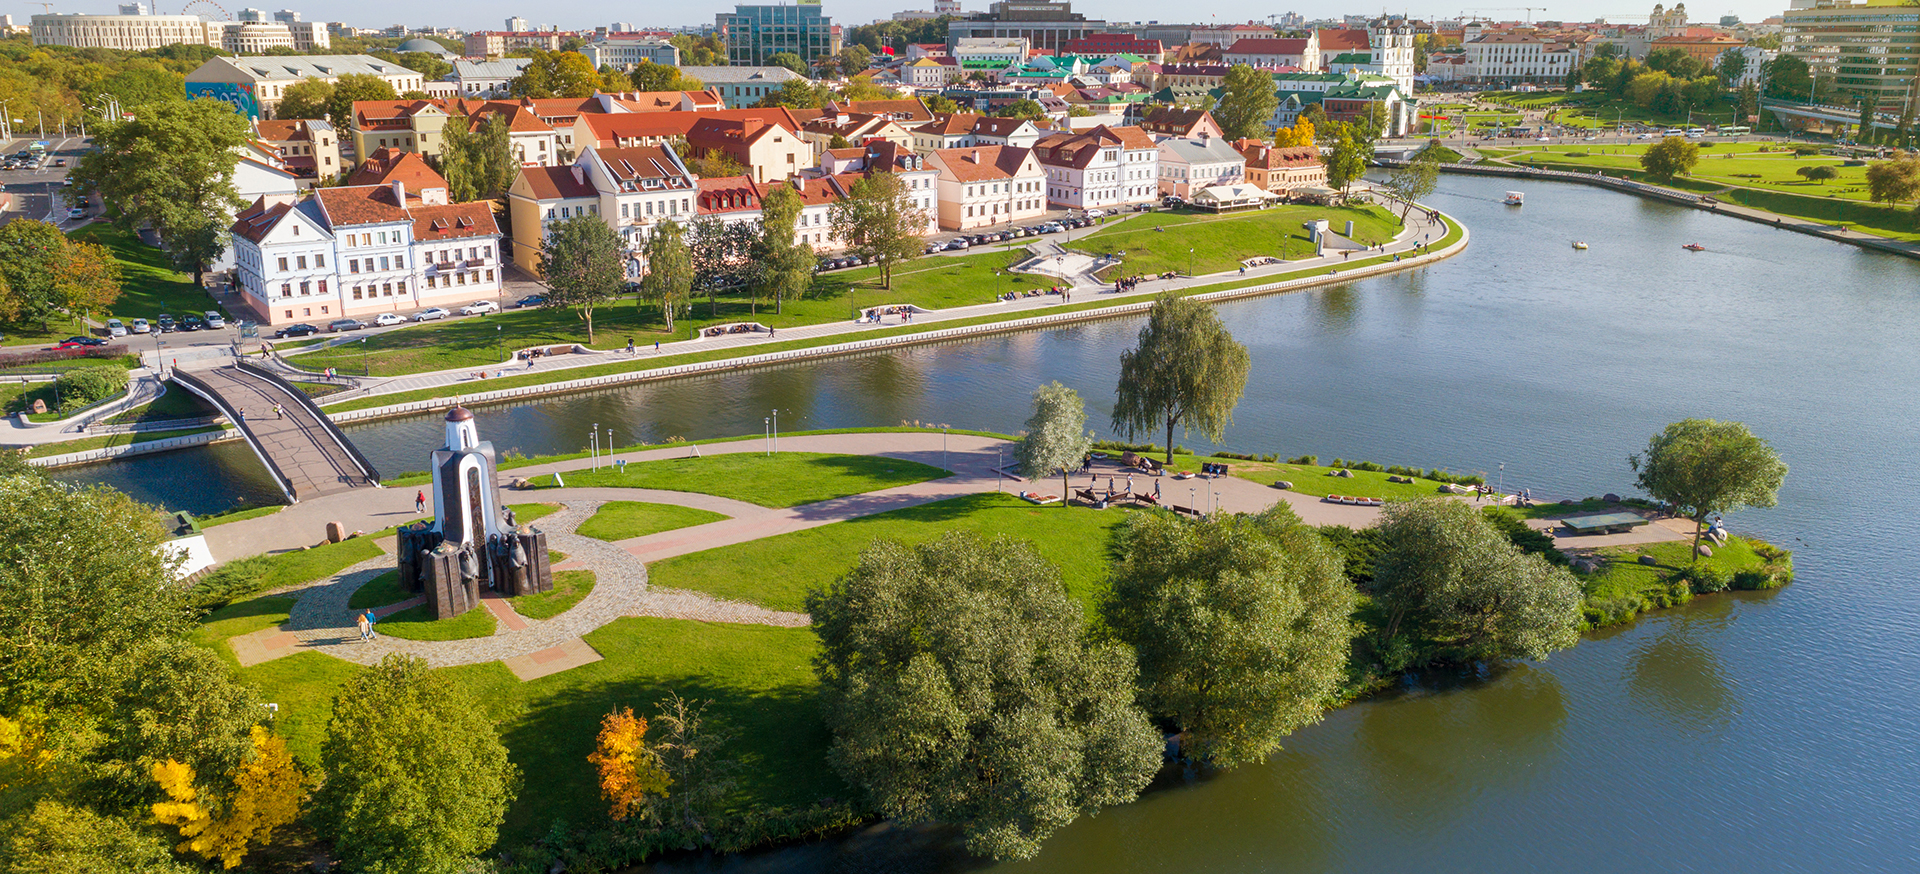 The Complete Guide on How to Move to Belarus permanently & pros and cons